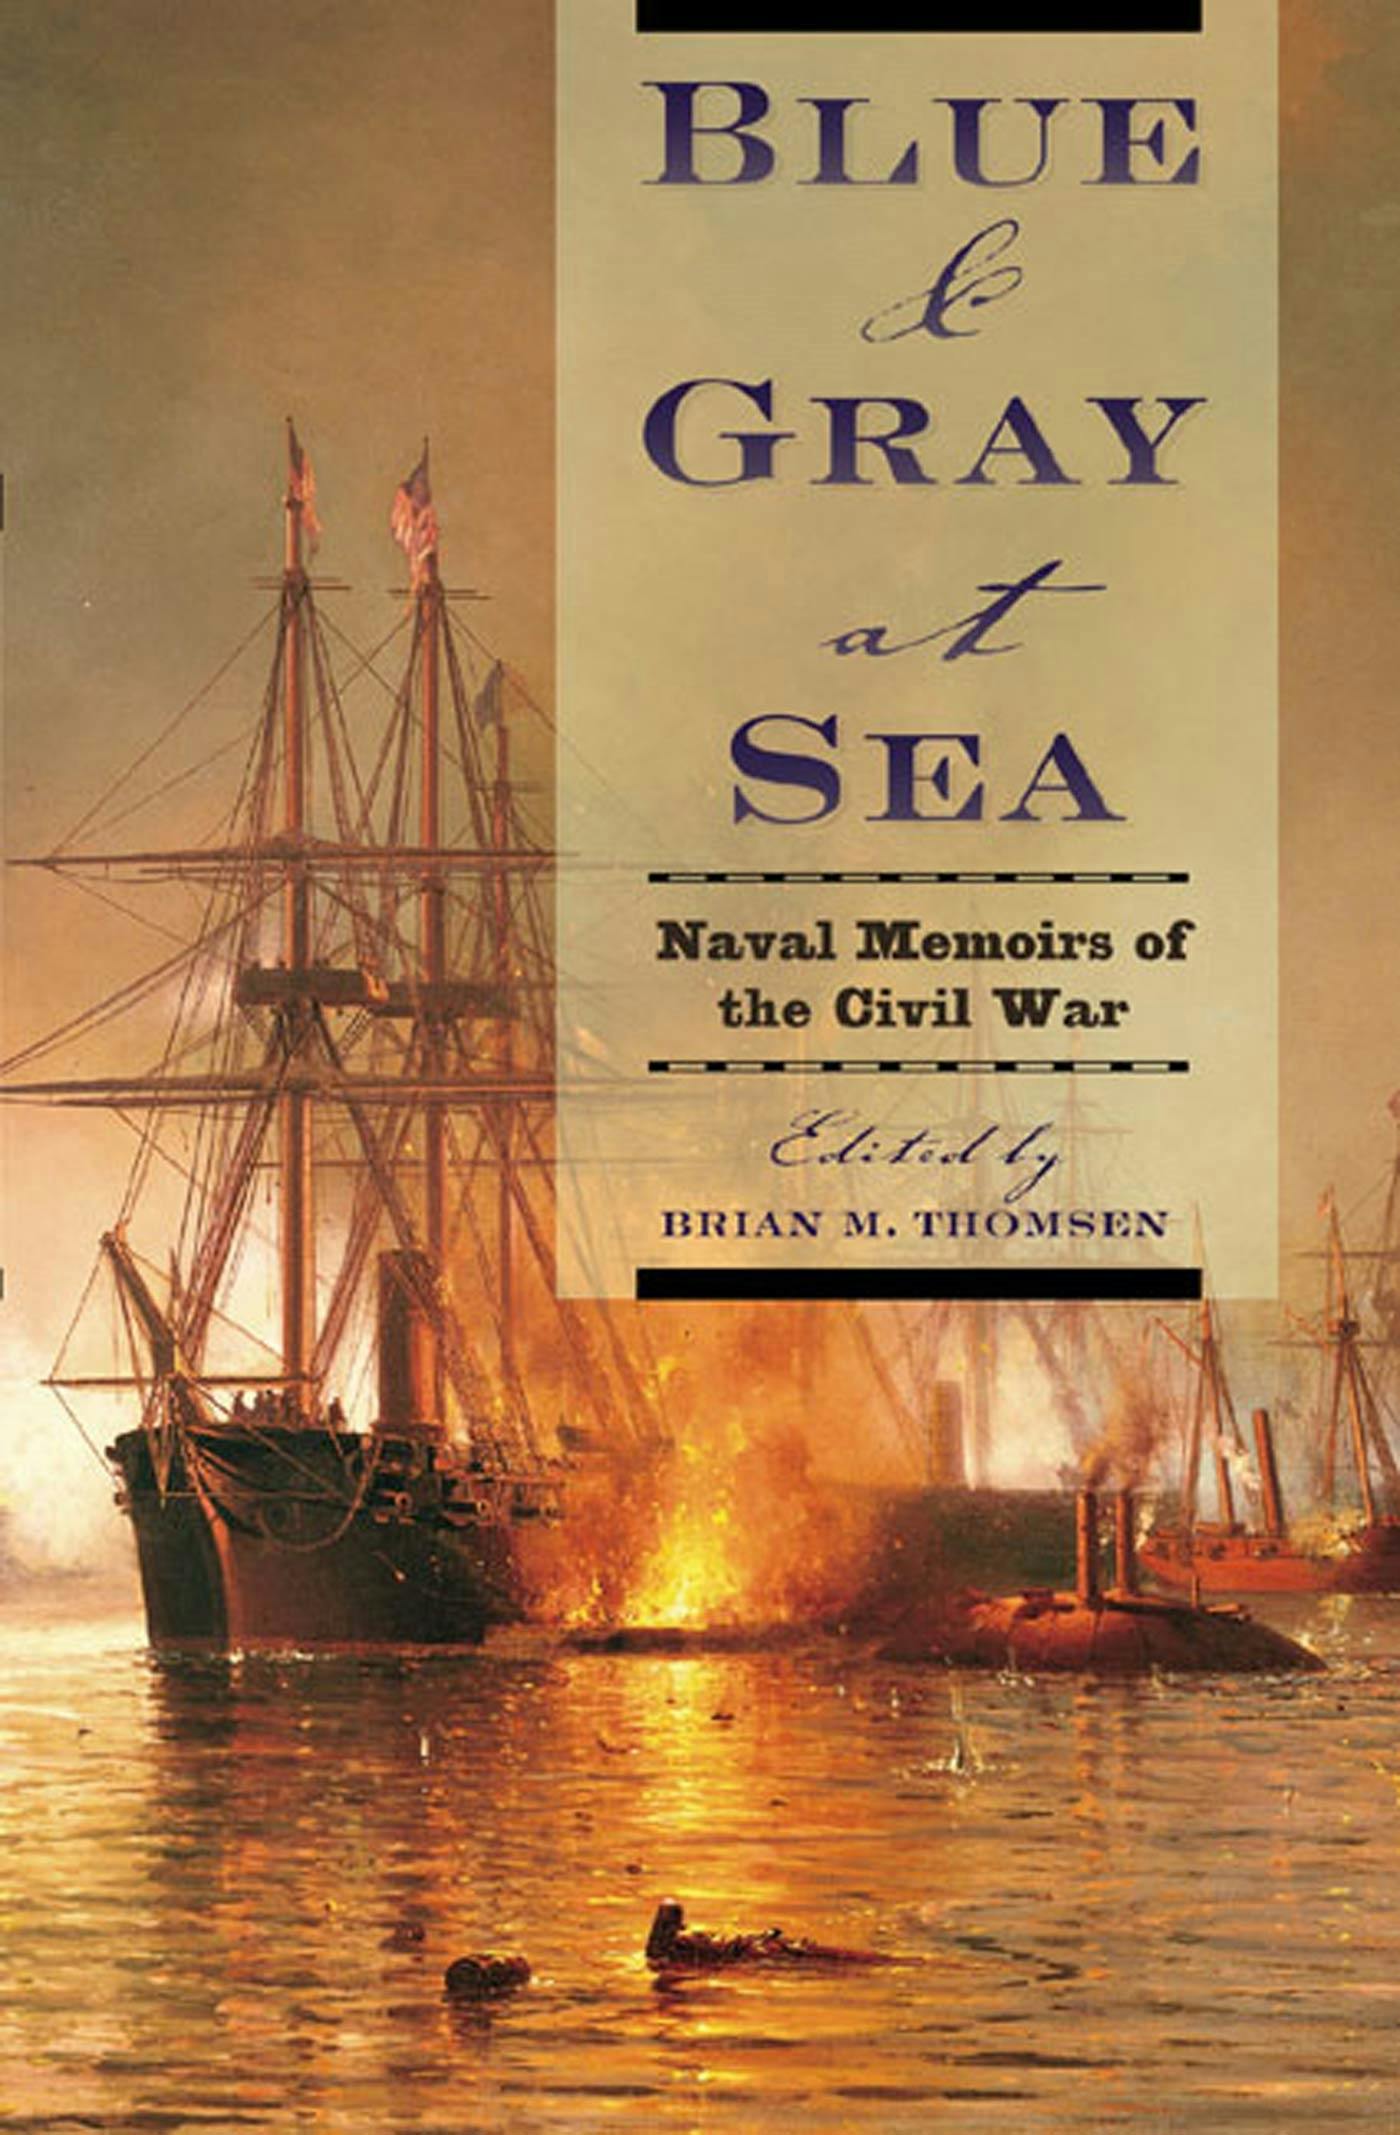 Cover for the book titled as: Blue & Gray at Sea